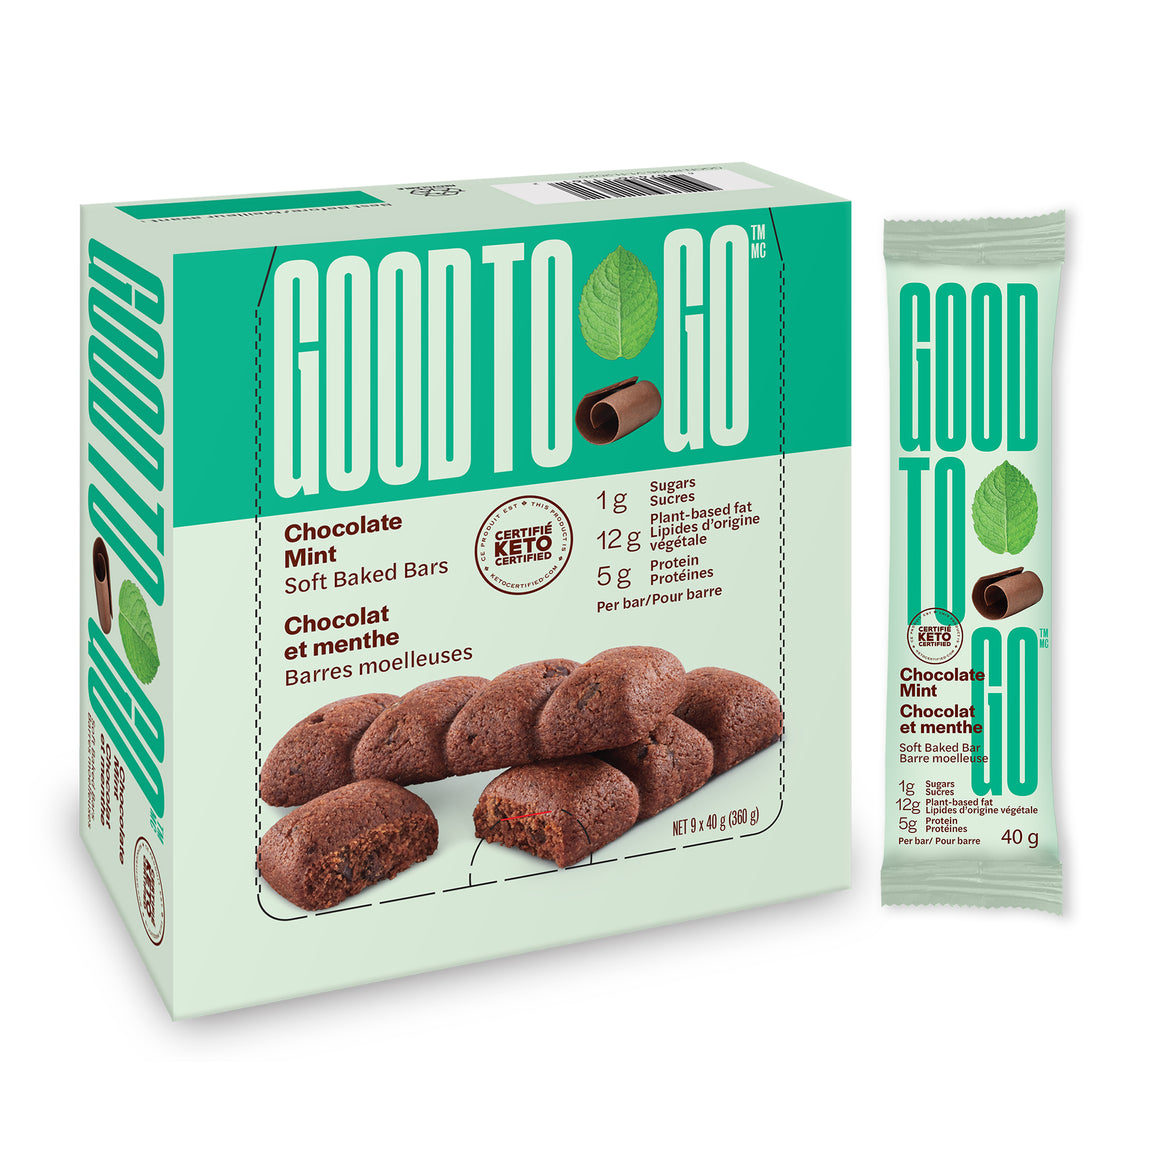 Chocolate Mint Snack Bar (9 Pack)